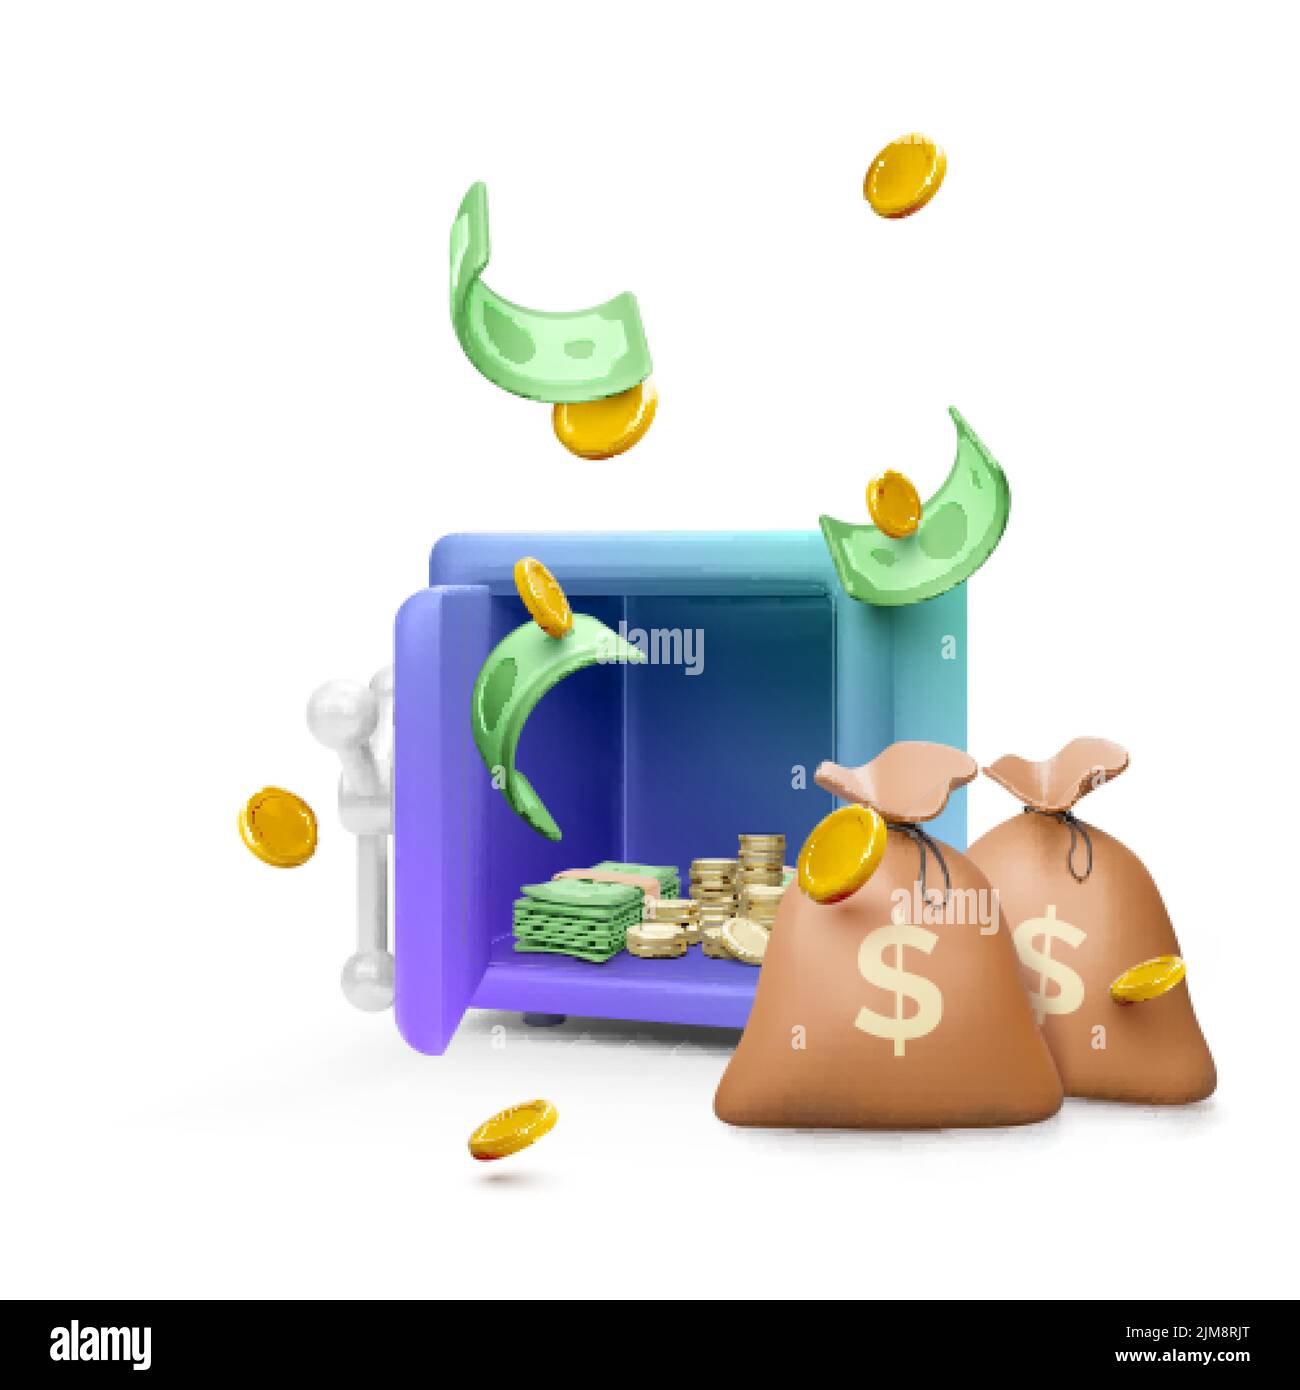 Money safe with open door and paper bills and gold coin inside and money bags next. Falling green dollars and coins in realistic cartoon style. Vector Stock Vector